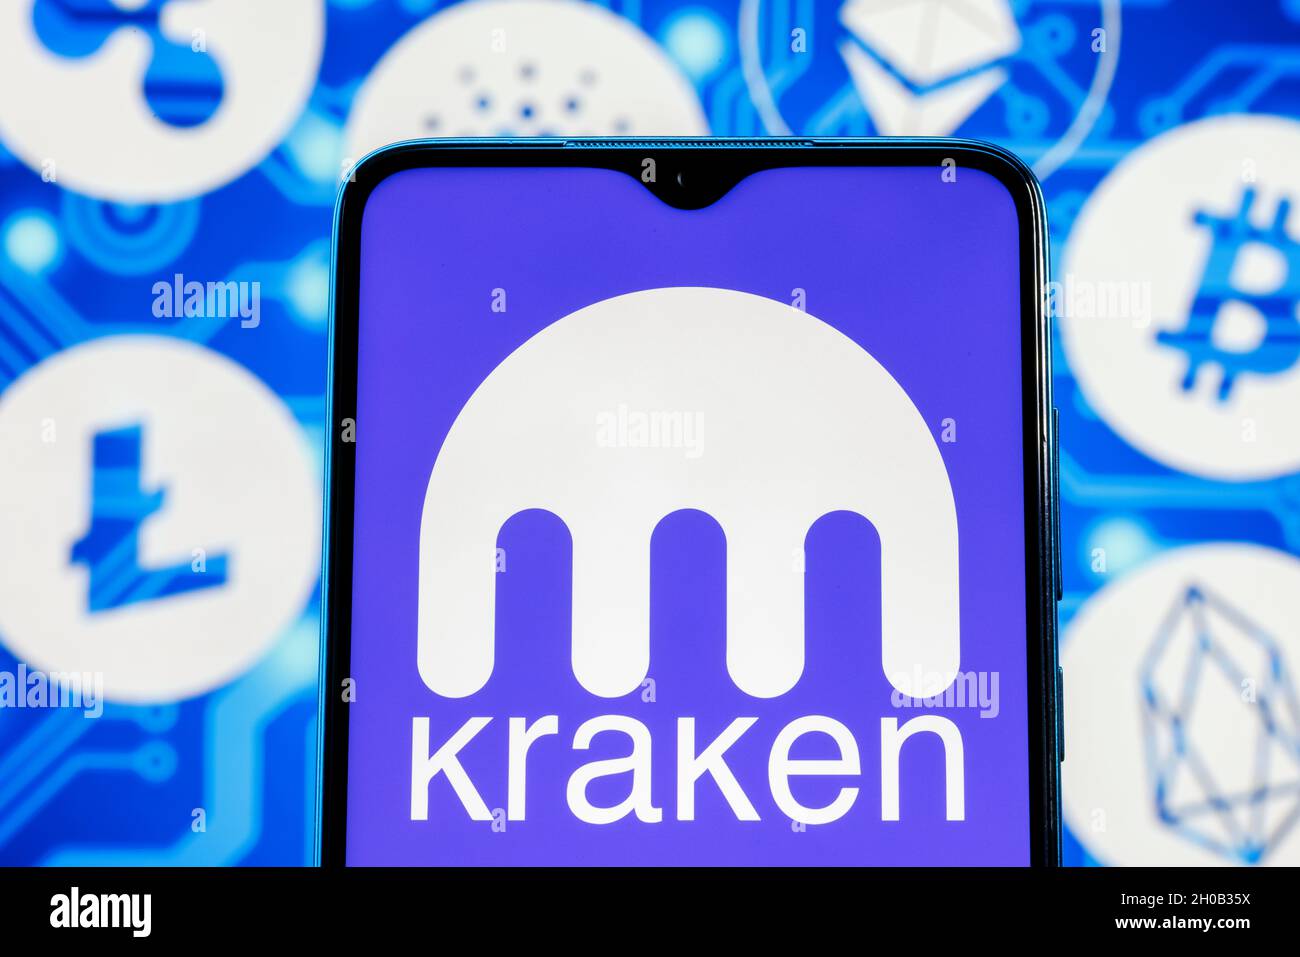 Kraken is cryptocurrency exchange. Kraken logo on smartphone screen against the background of the main cryptocurrencies. Stock Photo